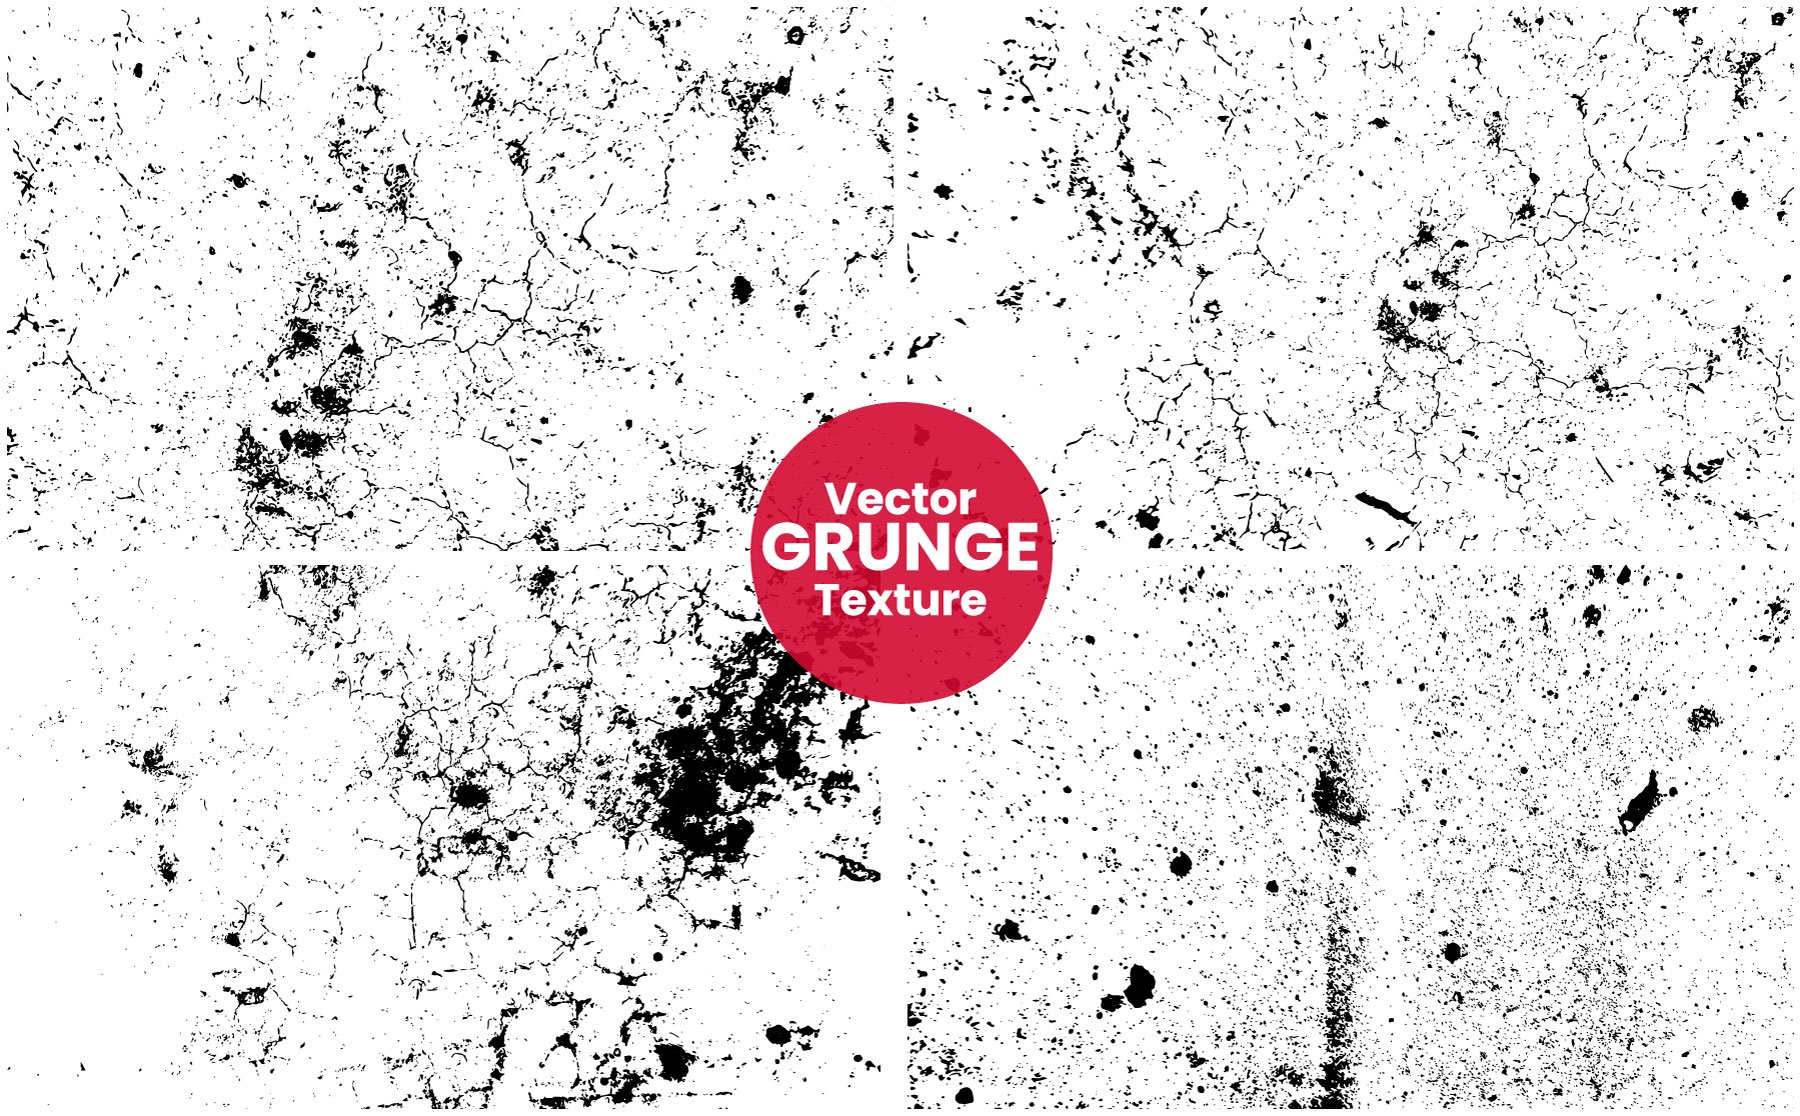 Grunge texture background preview image.